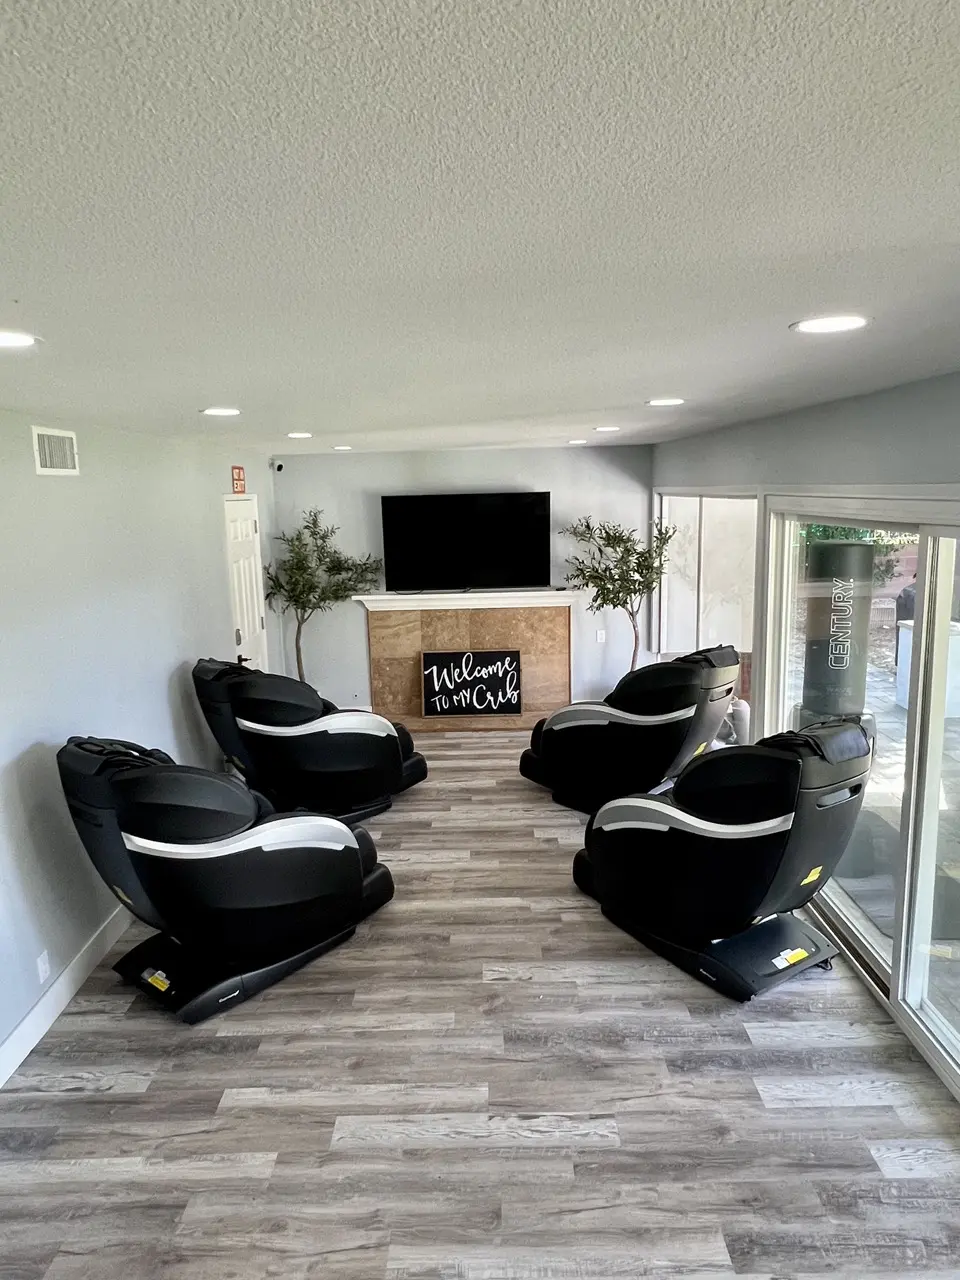 substance use disorder rehab residential living room. There are four couches and a flat screen tv on the wall above a fireplace